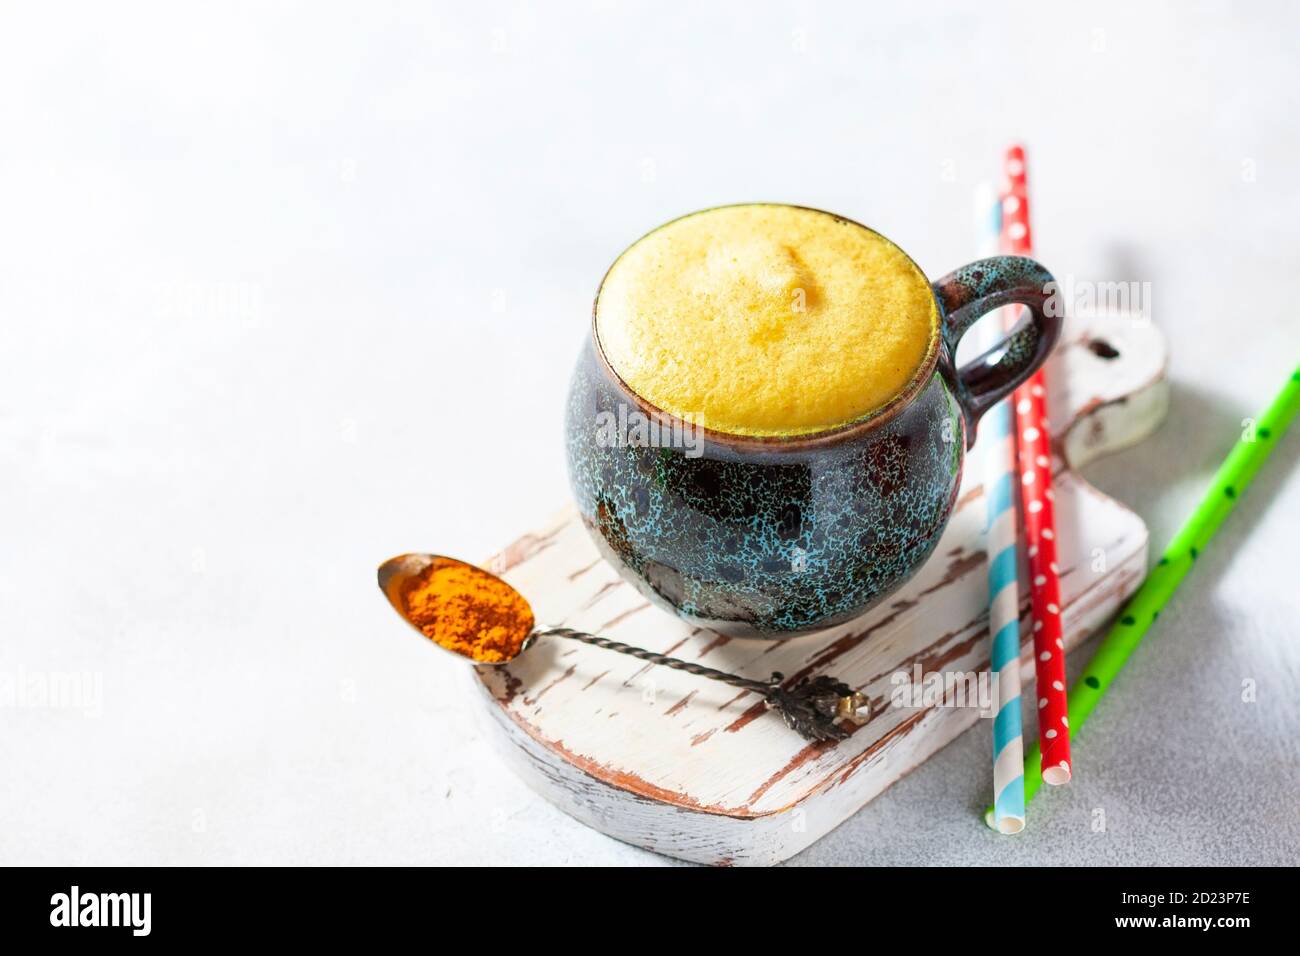 Cup of ayurvedic drink golden almond milk or turmeric latte with curcuma powder on white background. Natural detox beverage with spices. Stock Photo